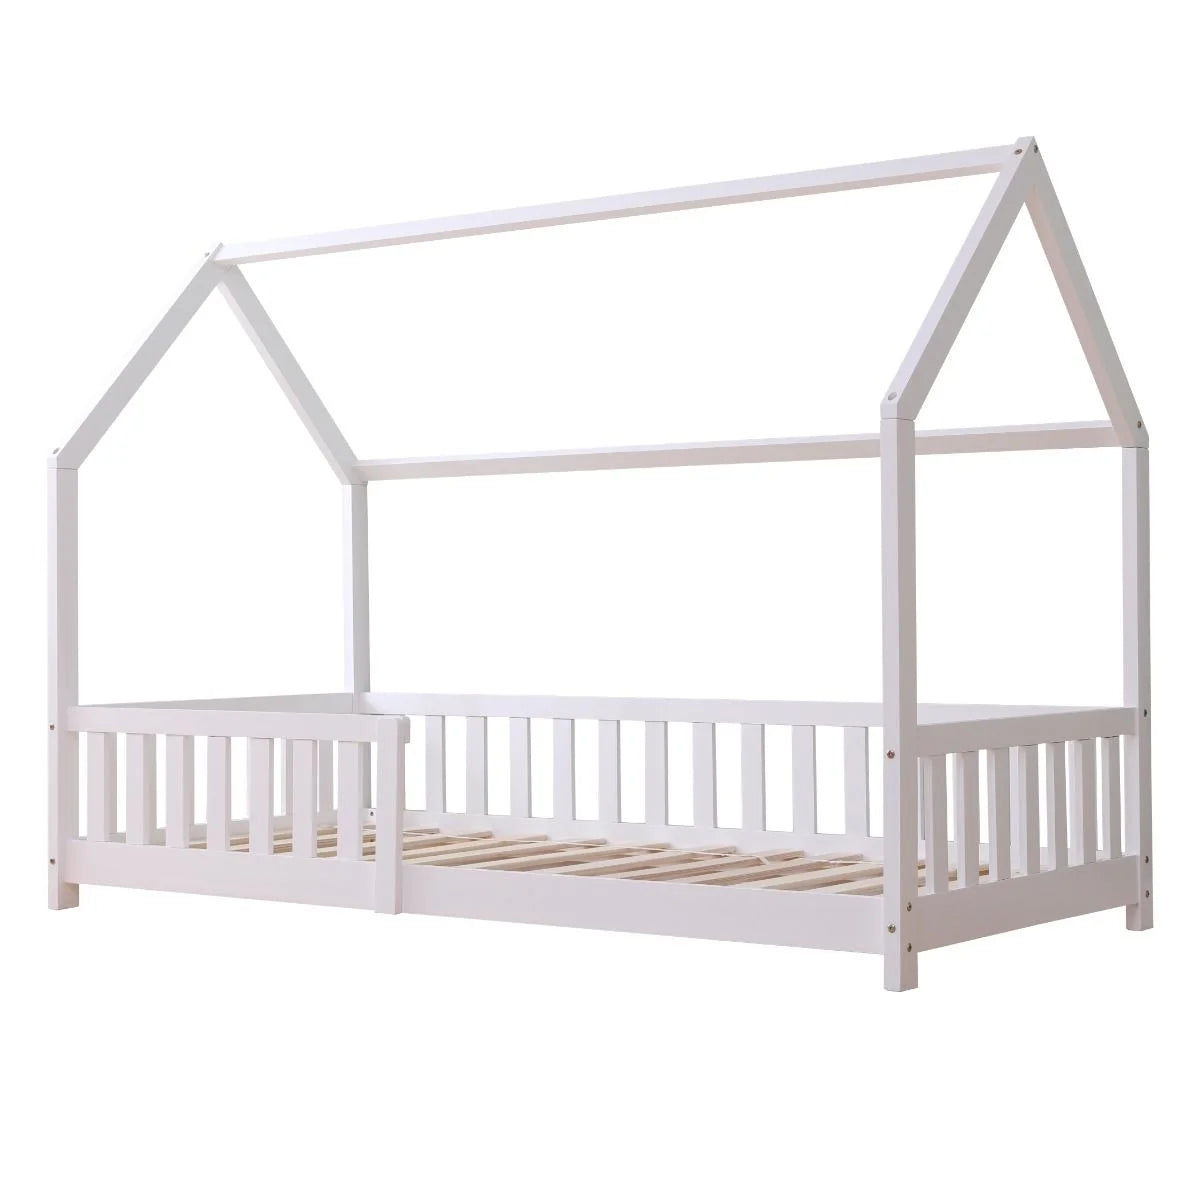 Flair-White-Wooden-Explorer-Playhouse-Bed-With-Rails